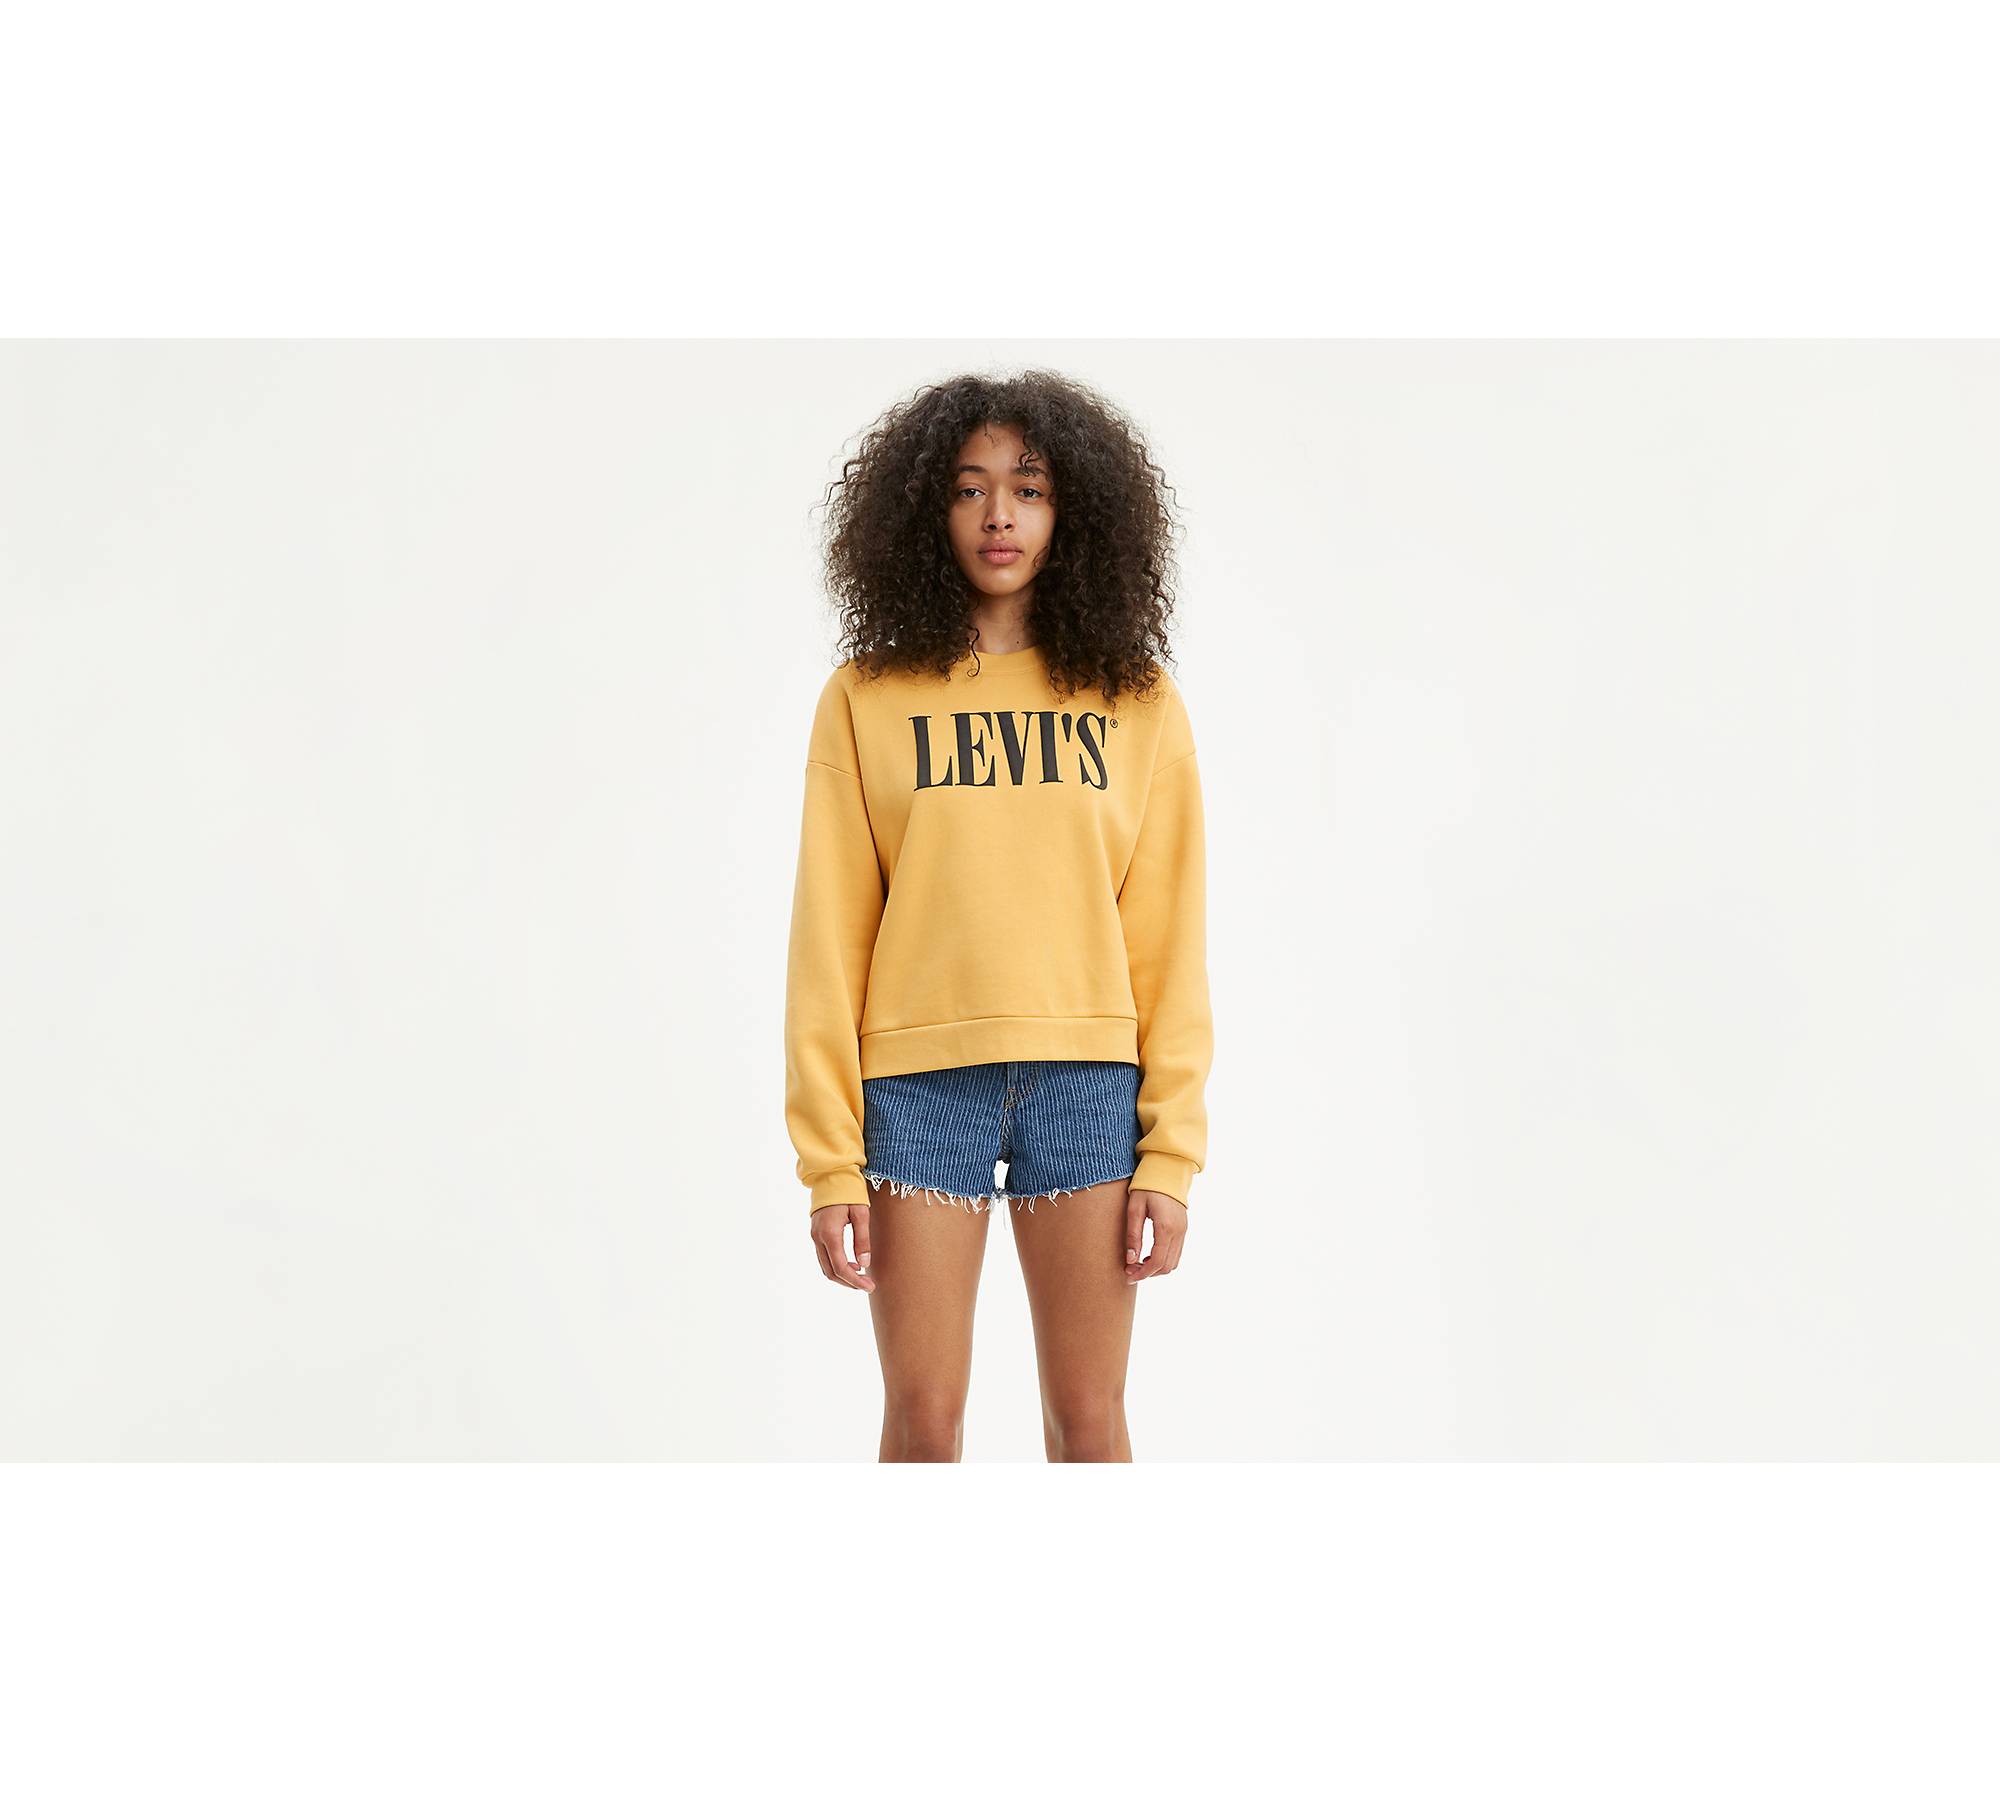 Women's Crewneck Spring Pullover Sweater - A New Day™ Yellow XL